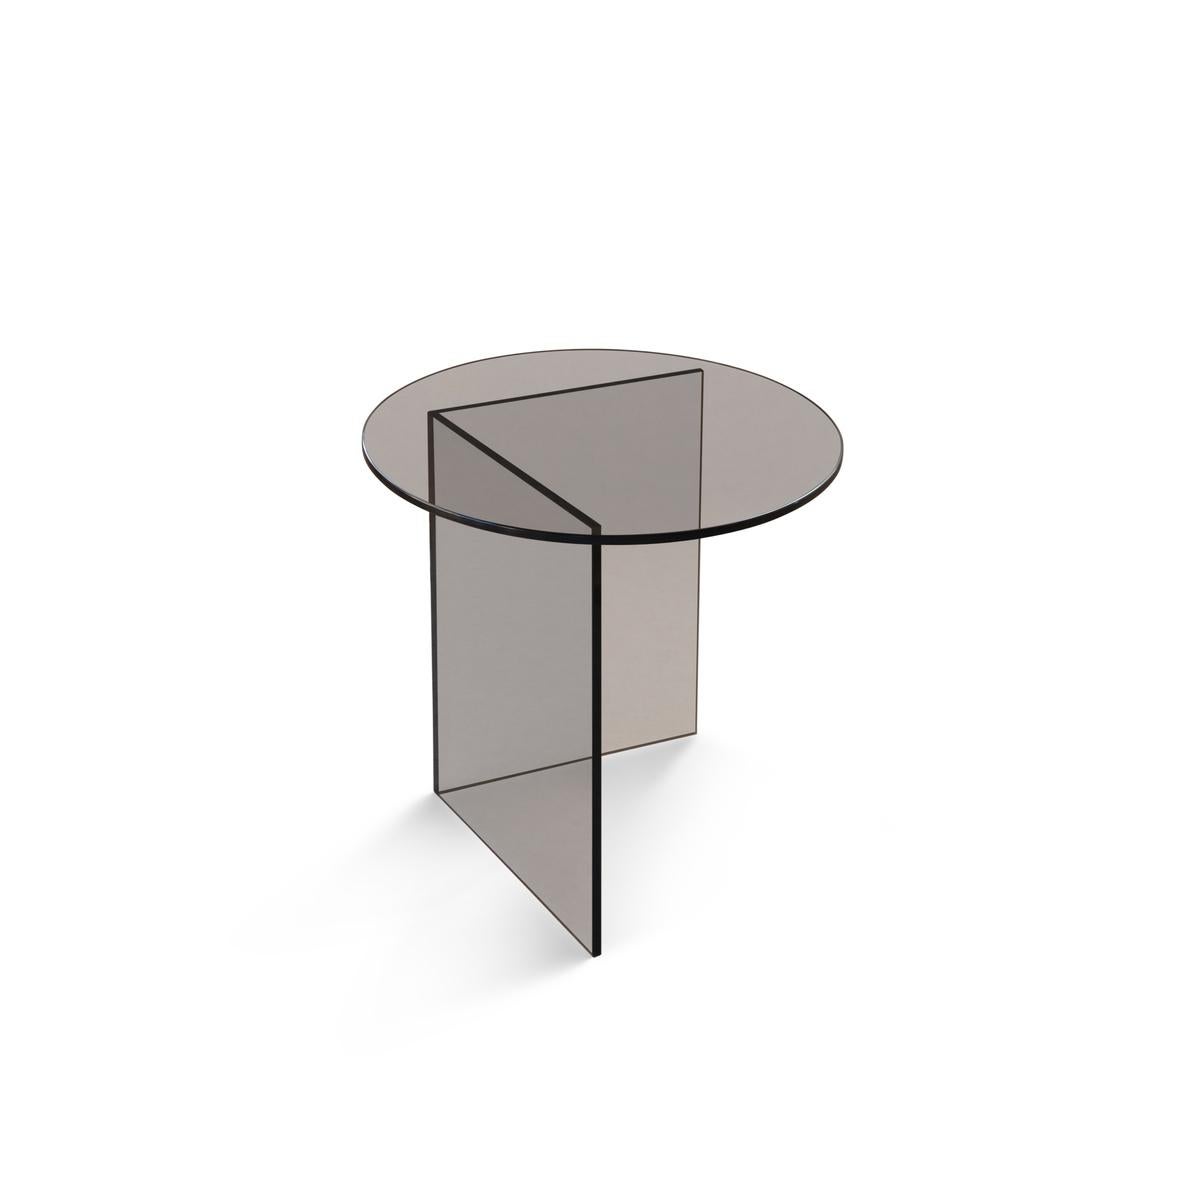 Pond - Side table
Design: Friends & Founders

Material: glass
* Clear
* Bronze
* Grey smoke


Contemporary design studio Friends & Founders was founded in 2003 by Ida Linea and Rasmus Hilderbrand in Copenhagen, Denmark.
For this couple,